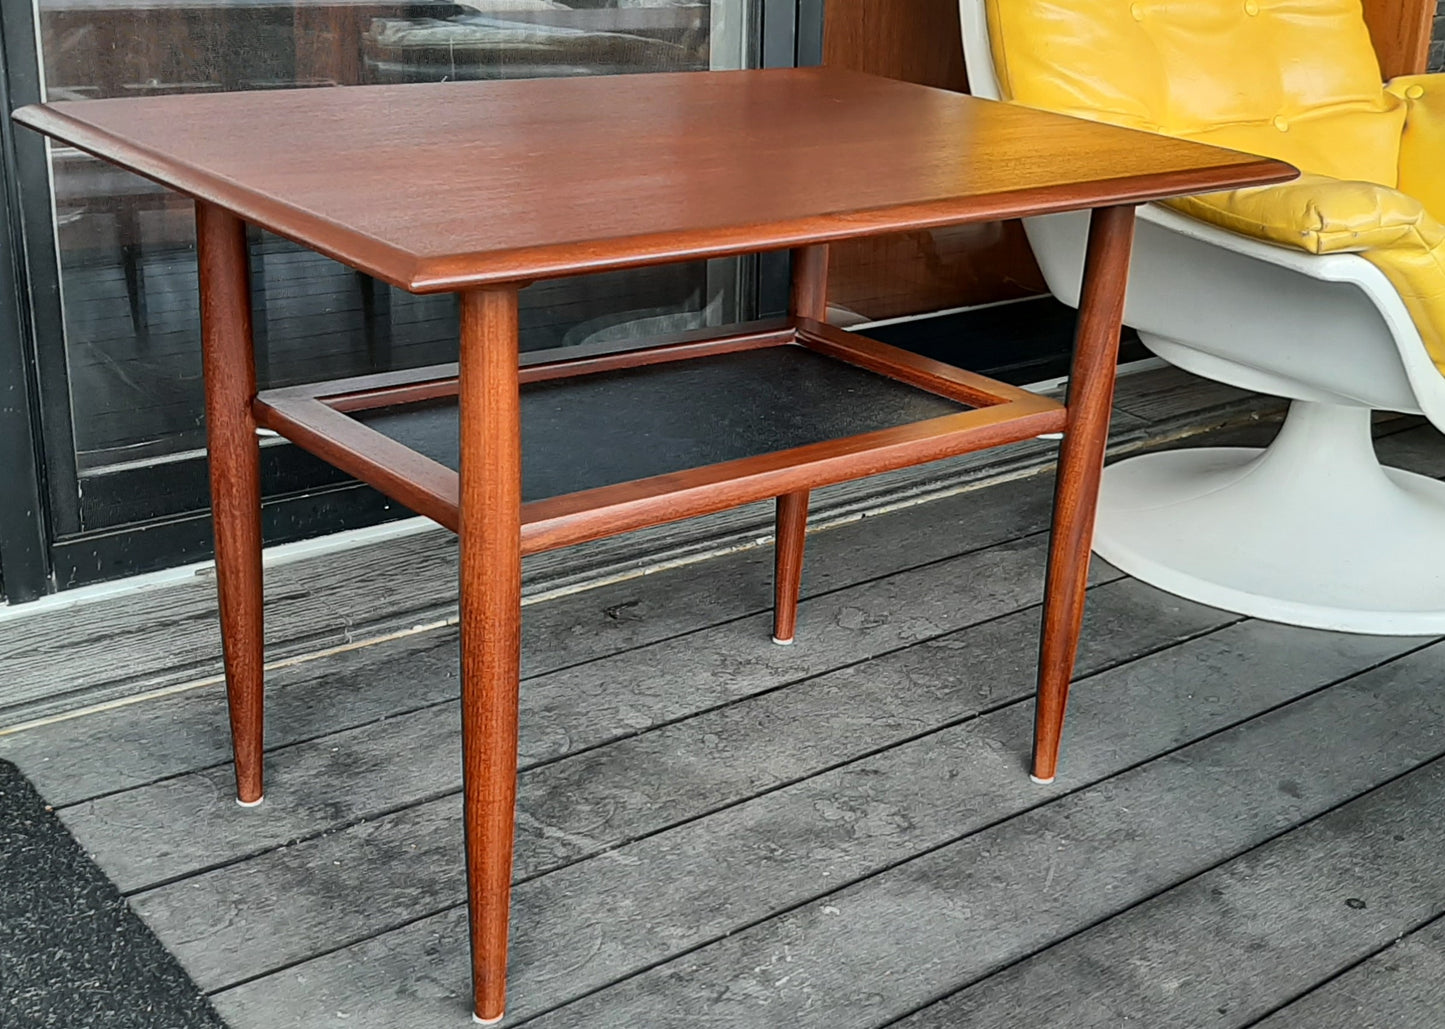 REFINISHED Mid Century Modern Teak Accent Tables with Shelves by RS Associates